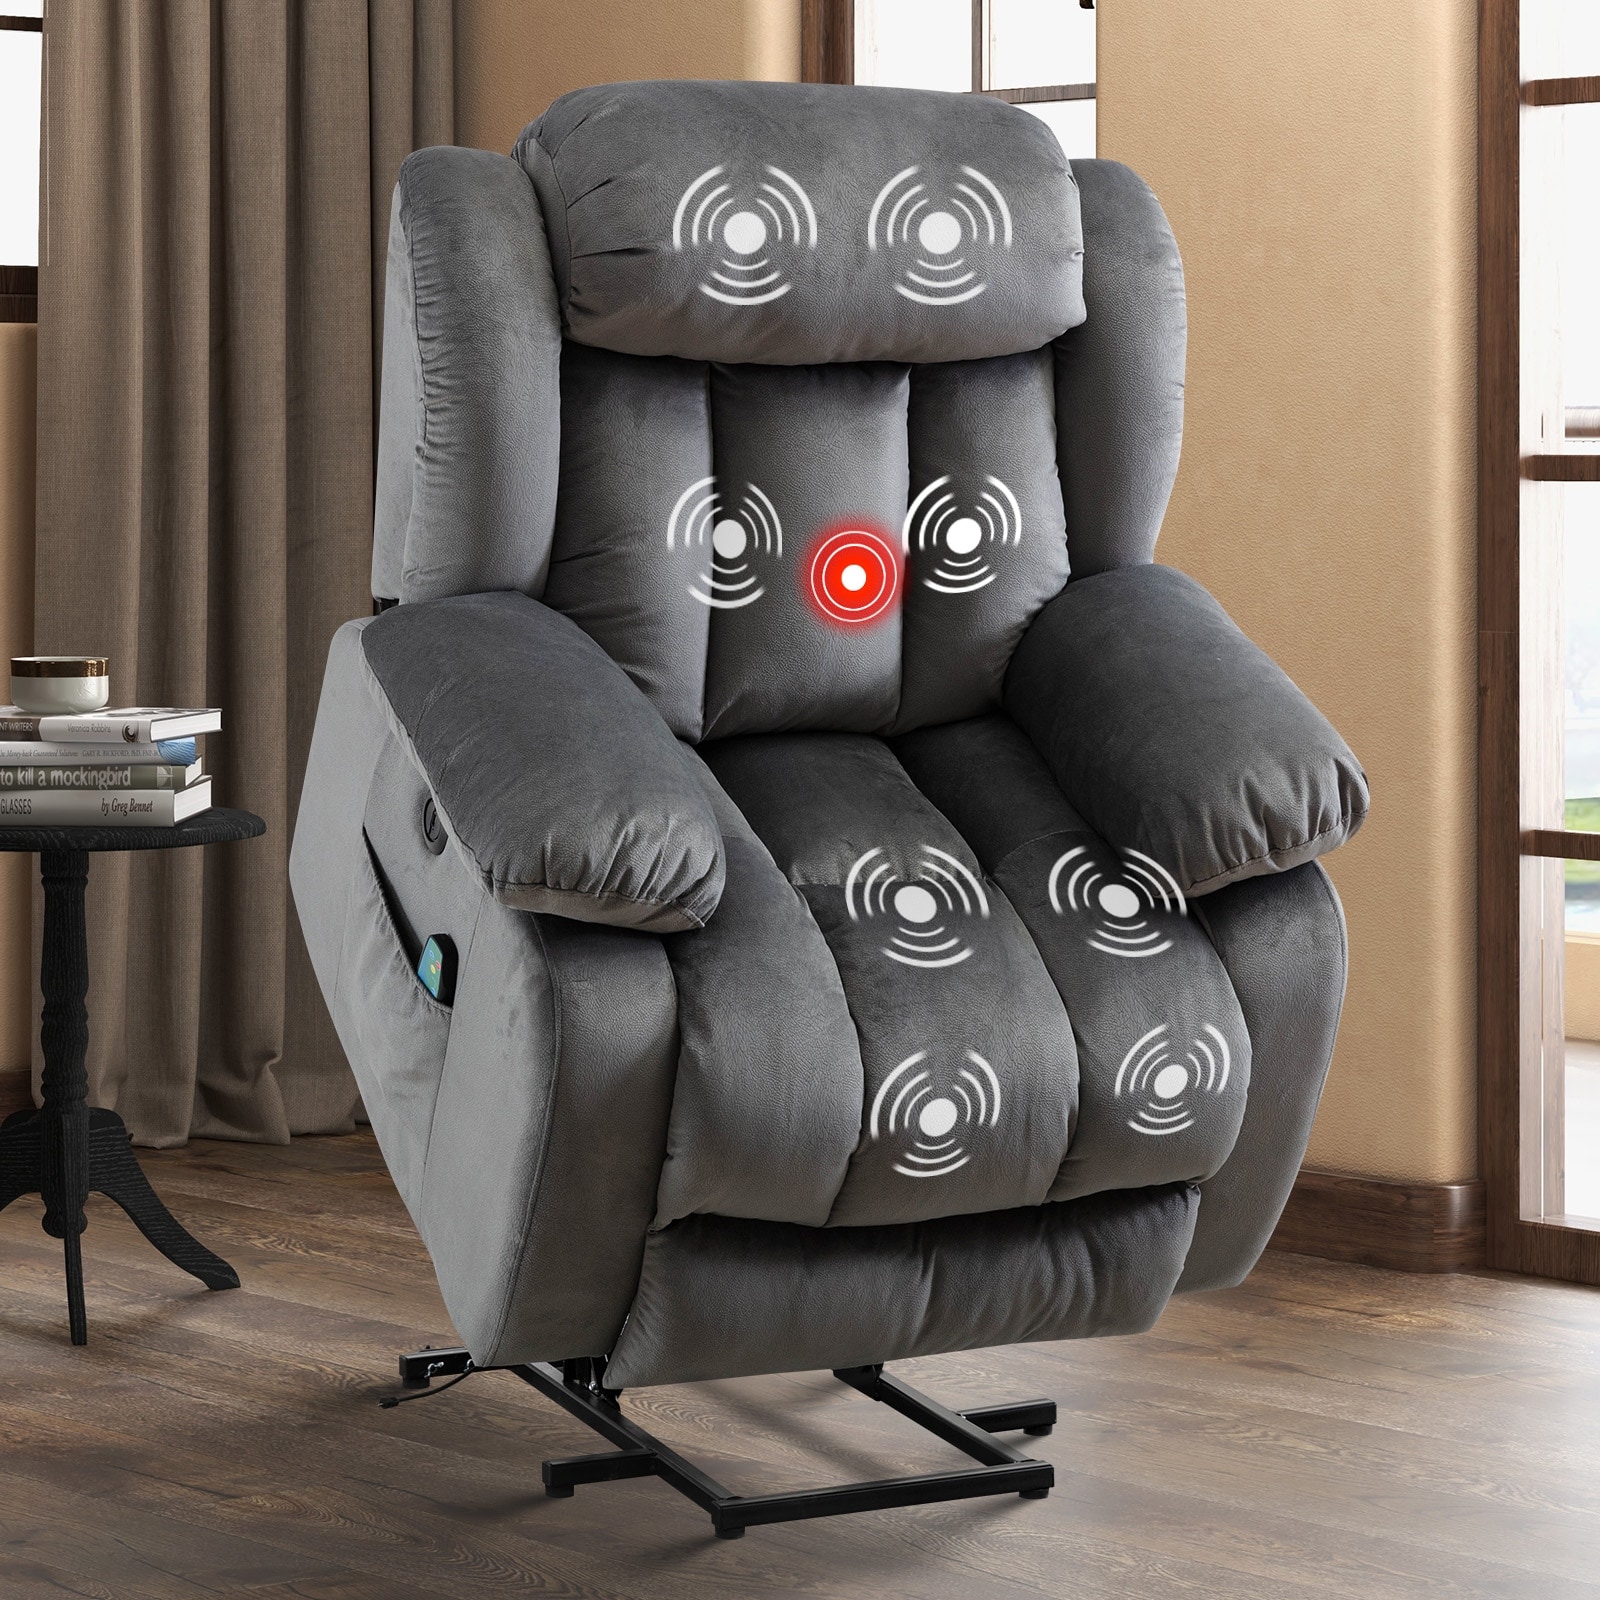 https://ak1.ostkcdn.com/images/products/is/images/direct/38ce0621a48edf5f83dc84fee4163212e867e3d5/Heavy-Duty-Large-Power-Lift-Recliner-with-Massage-and-Heating-for-Elderly.jpg